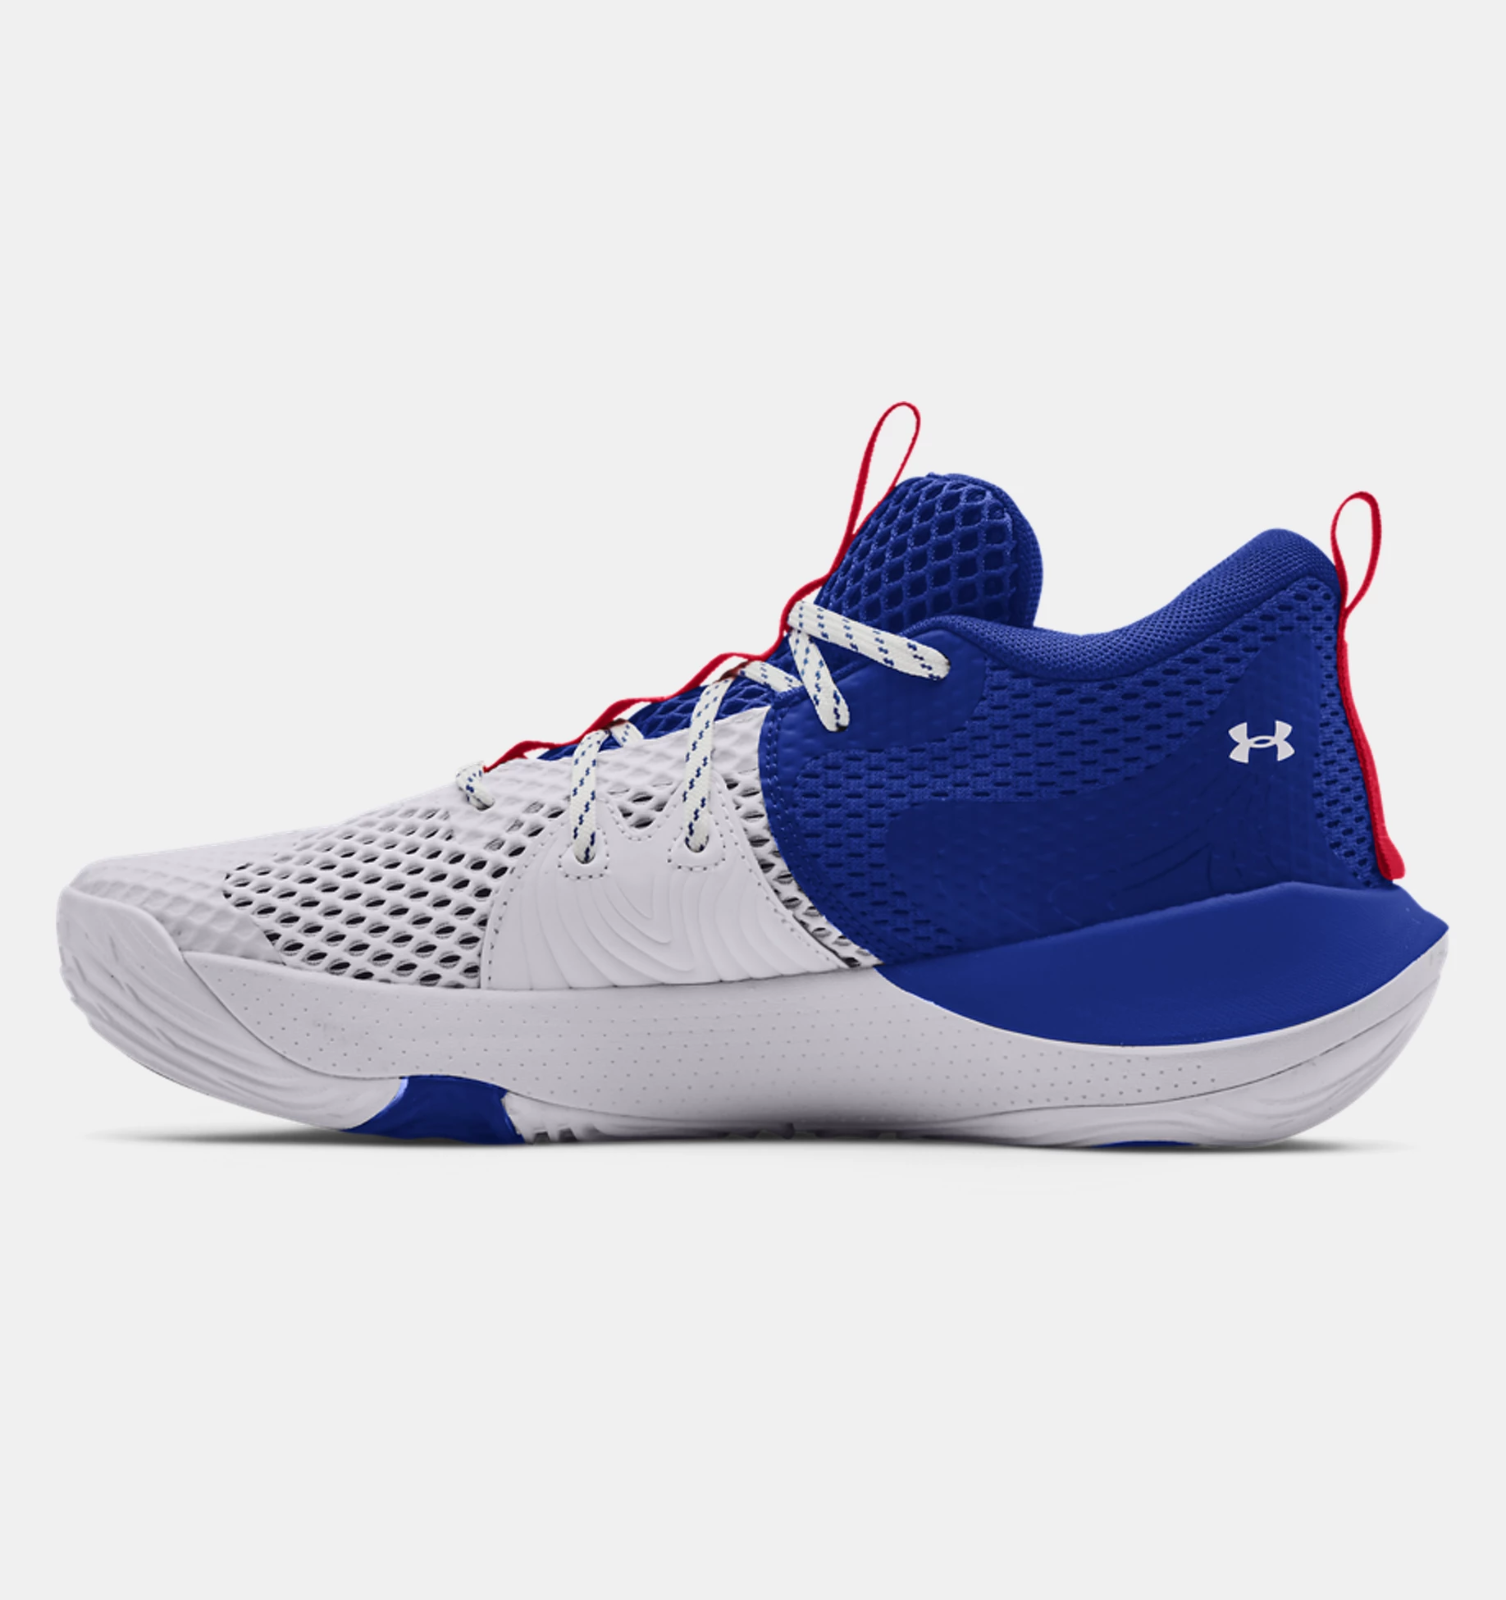 Under Armour Ranking integrated 1st place Embiid One Basketball RED WHT Fashion BLUE Shoes